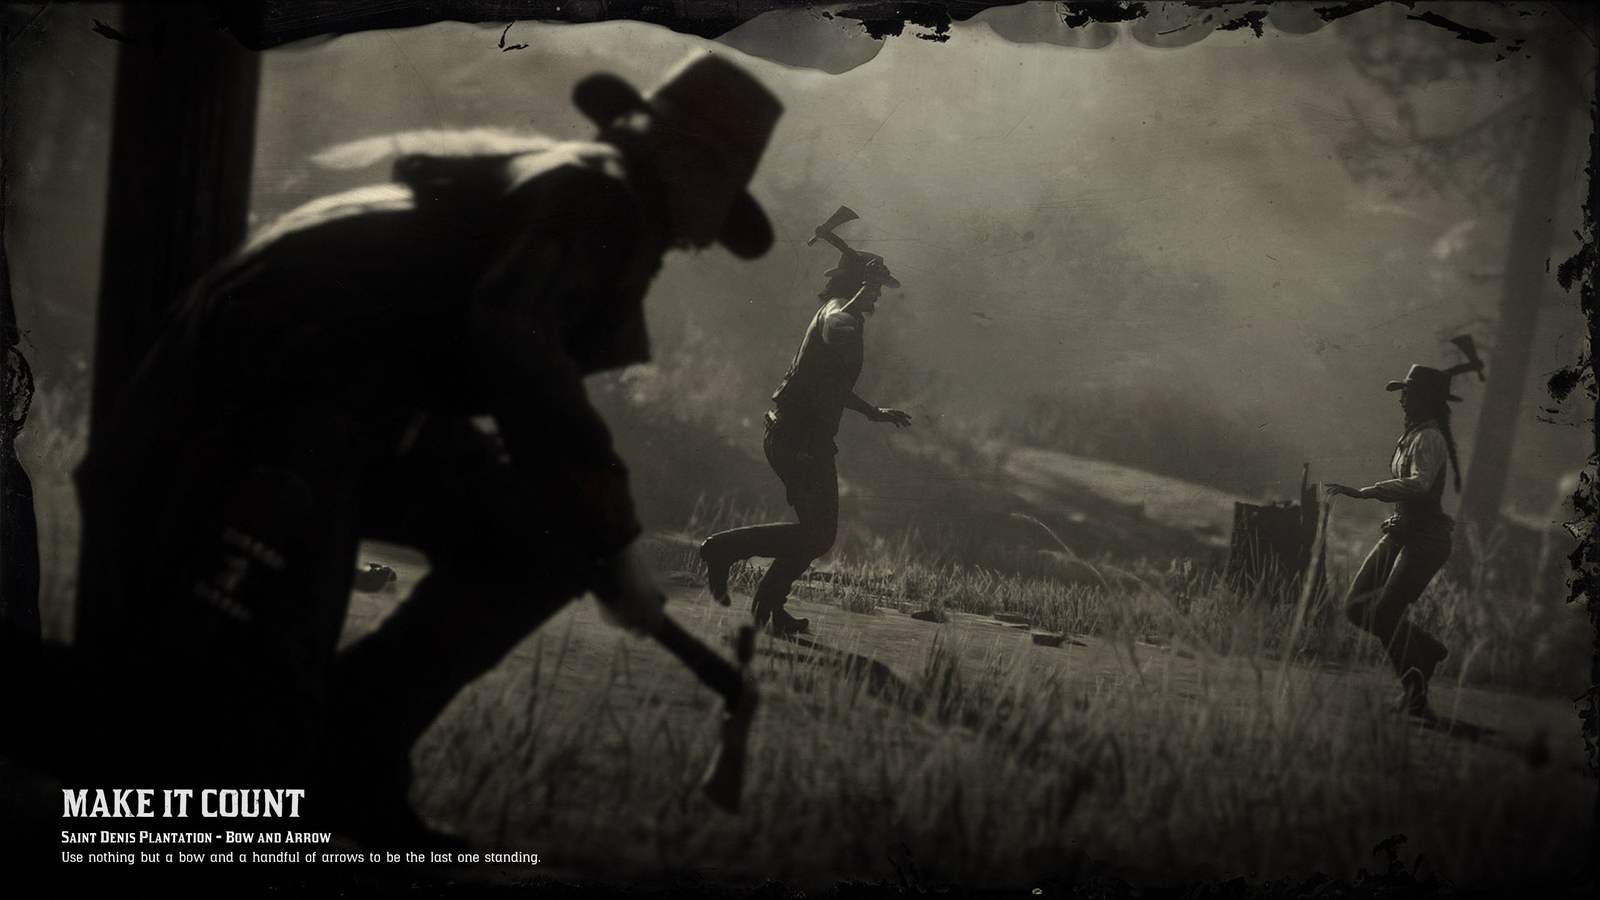 Red Dead Online tips: 16 rootin', tootin' tricks for new and returning  gunslingers